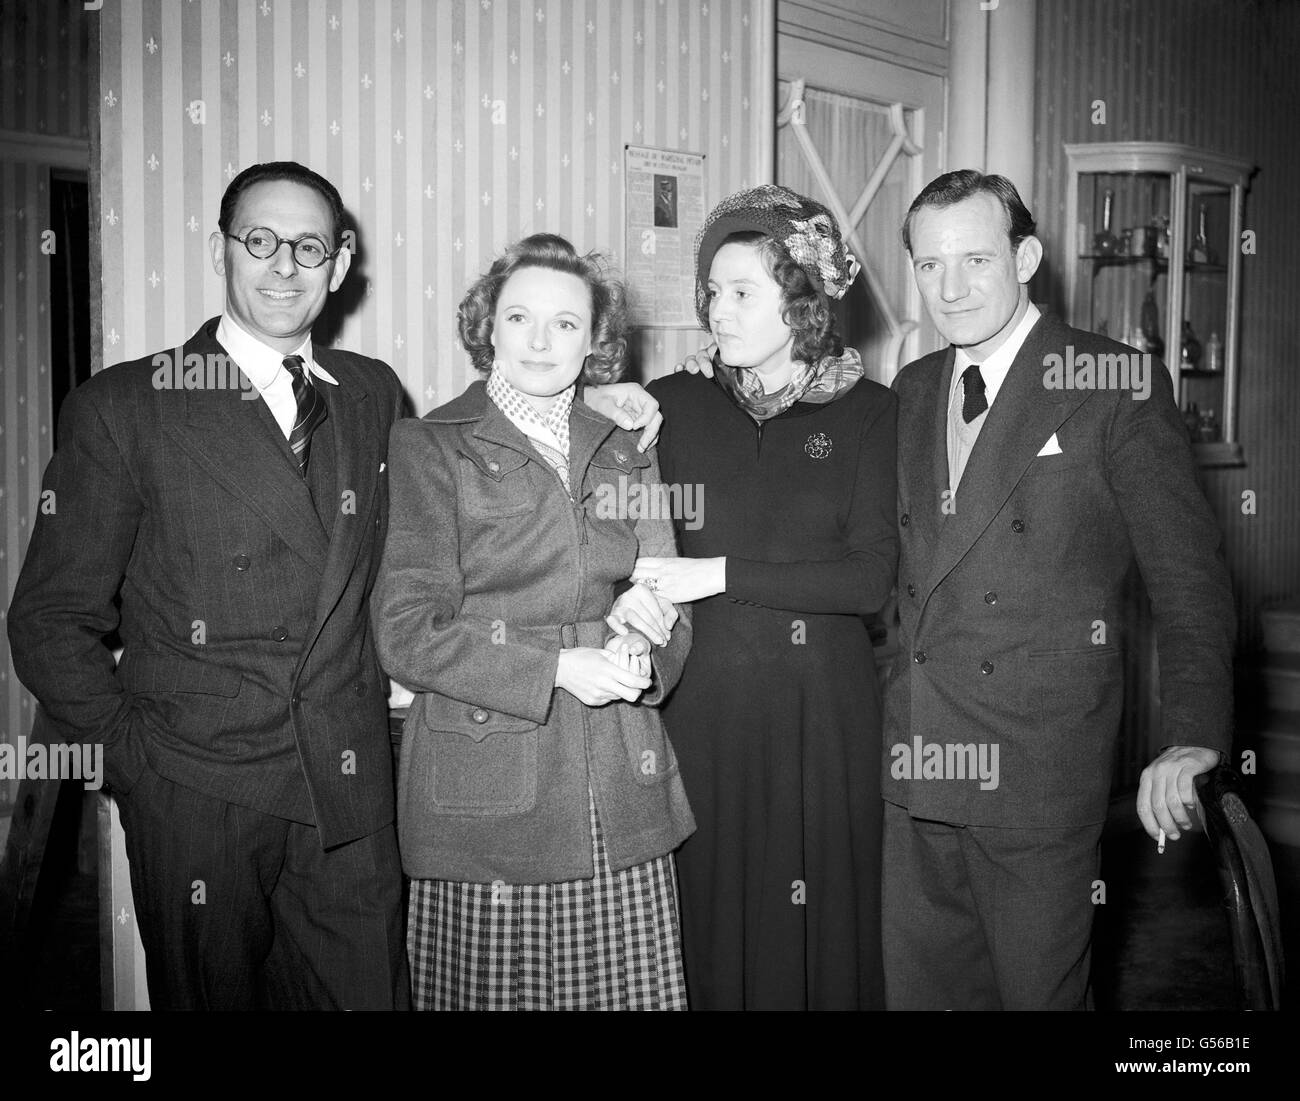 Left to right, Captain Peter Churchill, Anna Neagle, Odette Churchill, and Trevor Howard at Borehamwood on the set of 'Odette, G.C'. The film is based on the wartime exploits of Mrs Churchill - then Mrs Odette Sansom - who was awarded the George Cross for her work as a British secret agent in occupied France. She was tortured by the Gestapo when she refused to betray her commanding officer, Captain Peter Churchill (whom she married afterwards). In the film the part is played by Anna Neagle and the part of Captain Churchill is played by Trevor Howard. Stock Photo